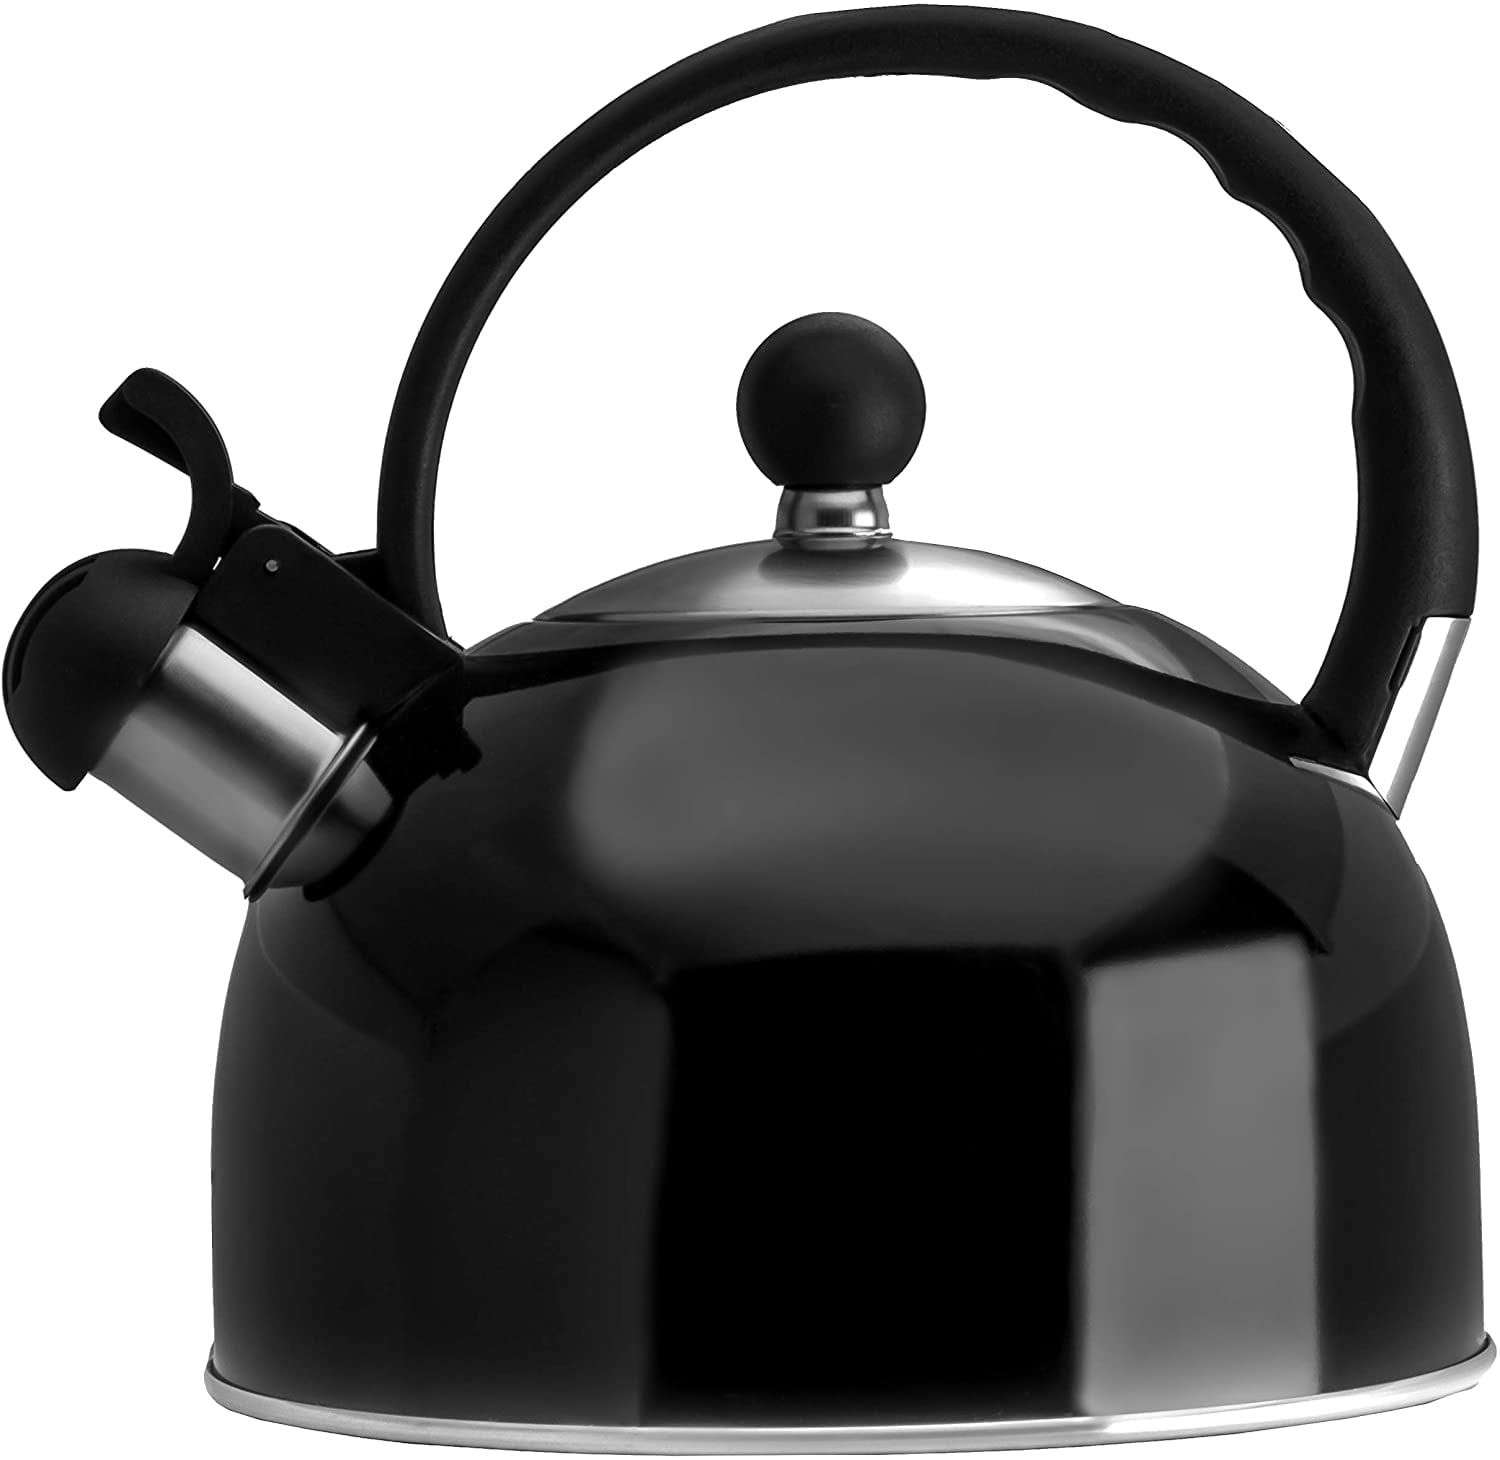 Black 2.5 Liter Stainless Steel Whistling Tea Kettle Modern Stainless Steel Whistling Tea Pot for Stovetop with Cool Grip Ergonomic Handle 